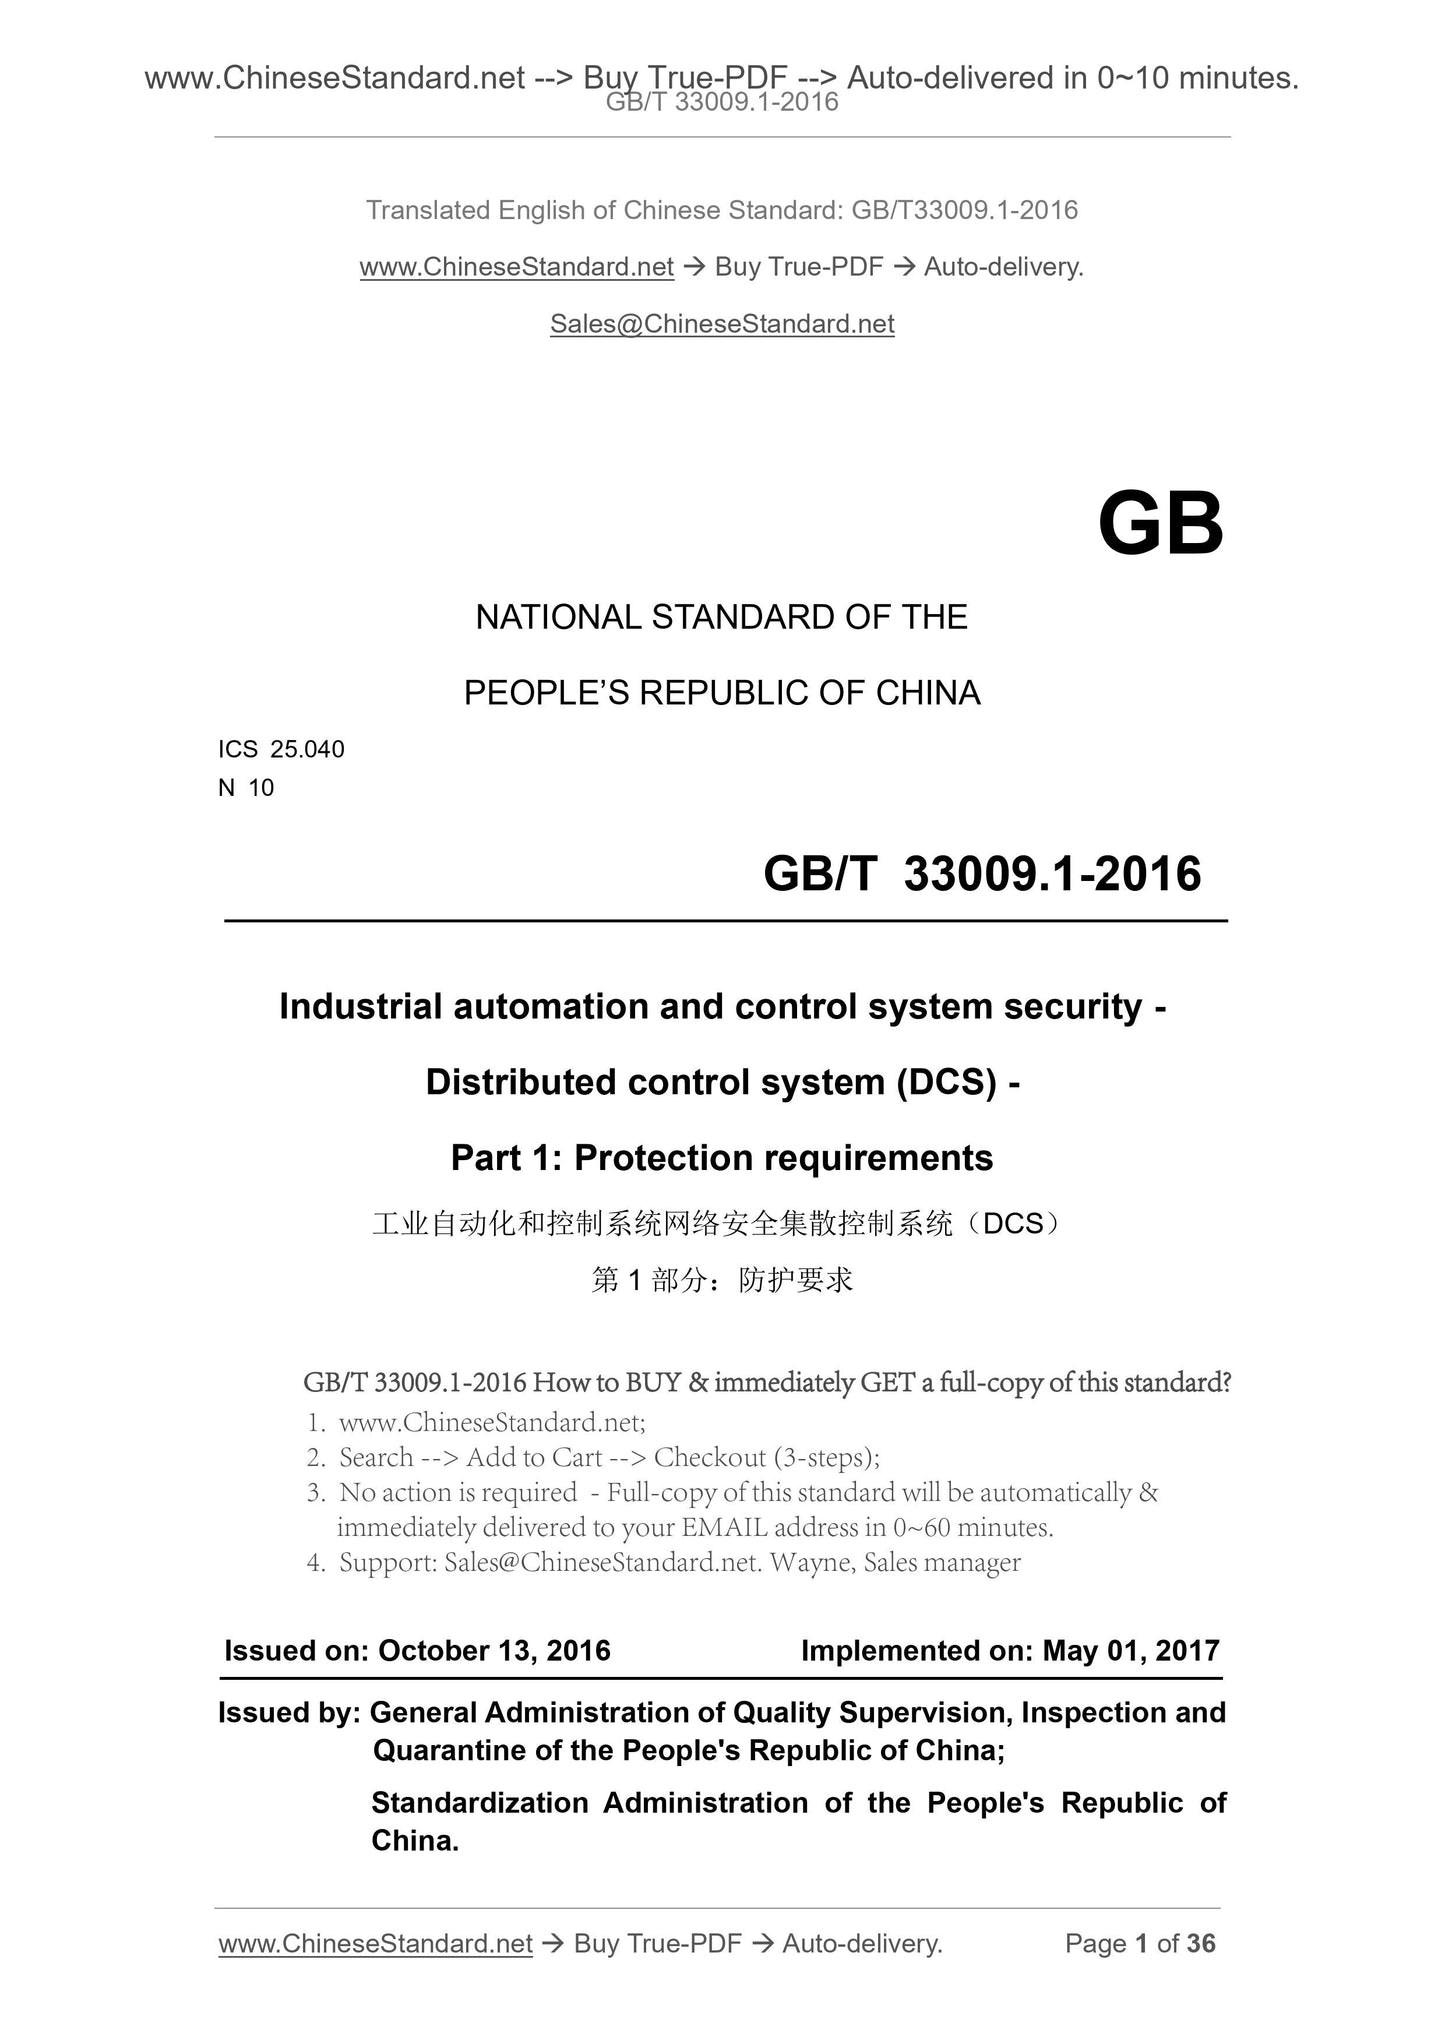 GB/T 33009.1-2016 Page 1